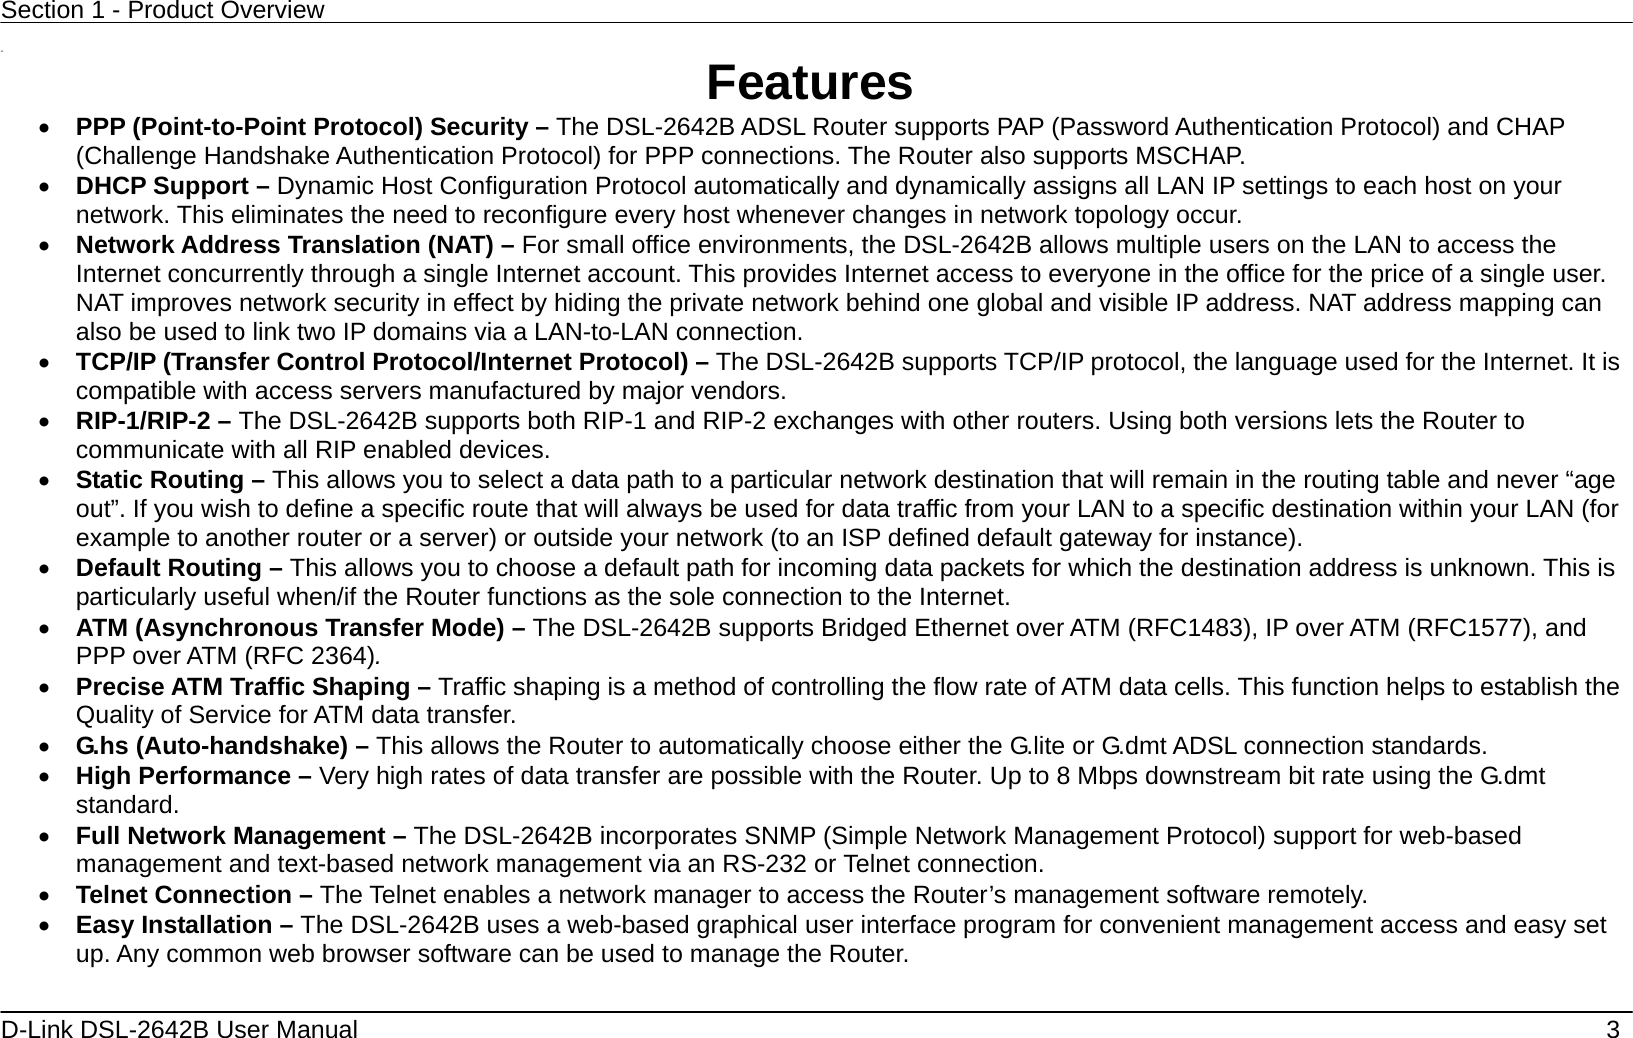 Section 1 - Product Overview  D-Link DSL-2642B User Manual    3  11  Features •  PPP (Point-to-Point Protocol) Security – The DSL-2642B ADSL Router supports PAP (Password Authentication Protocol) and CHAP (Challenge Handshake Authentication Protocol) for PPP connections. The Router also supports MSCHAP. •  DHCP Support – Dynamic Host Configuration Protocol automatically and dynamically assigns all LAN IP settings to each host on your network. This eliminates the need to reconfigure every host whenever changes in network topology occur. •  Network Address Translation (NAT) – For small office environments, the DSL-2642B allows multiple users on the LAN to access the Internet concurrently through a single Internet account. This provides Internet access to everyone in the office for the price of a single user. NAT improves network security in effect by hiding the private network behind one global and visible IP address. NAT address mapping can also be used to link two IP domains via a LAN-to-LAN connection. •  TCP/IP (Transfer Control Protocol/Internet Protocol) – The DSL-2642B supports TCP/IP protocol, the language used for the Internet. It is compatible with access servers manufactured by major vendors. •  RIP-1/RIP-2 – The DSL-2642B supports both RIP-1 and RIP-2 exchanges with other routers. Using both versions lets the Router to communicate with all RIP enabled devices. •  Static Routing – This allows you to select a data path to a particular network destination that will remain in the routing table and never “age out”. If you wish to define a specific route that will always be used for data traffic from your LAN to a specific destination within your LAN (for example to another router or a server) or outside your network (to an ISP defined default gateway for instance).     •  Default Routing – This allows you to choose a default path for incoming data packets for which the destination address is unknown. This is particularly useful when/if the Router functions as the sole connection to the Internet. •  ATM (Asynchronous Transfer Mode) – The DSL-2642B supports Bridged Ethernet over ATM (RFC1483), IP over ATM (RFC1577), and PPP over ATM (RFC 2364).   •  Precise ATM Traffic Shaping – Traffic shaping is a method of controlling the flow rate of ATM data cells. This function helps to establish the Quality of Service for ATM data transfer. •  G.hs (Auto-handshake) – This allows the Router to automatically choose either the G.lite or G.dmt ADSL connection standards.   •  High Performance – Very high rates of data transfer are possible with the Router. Up to 8 Mbps downstream bit rate using the G.dmt standard. •  Full Network Management – The DSL-2642B incorporates SNMP (Simple Network Management Protocol) support for web-based management and text-based network management via an RS-232 or Telnet connection. •  Telnet Connection – The Telnet enables a network manager to access the Router’s management software remotely. •  Easy Installation – The DSL-2642B uses a web-based graphical user interface program for convenient management access and easy set up. Any common web browser software can be used to manage the Router. 